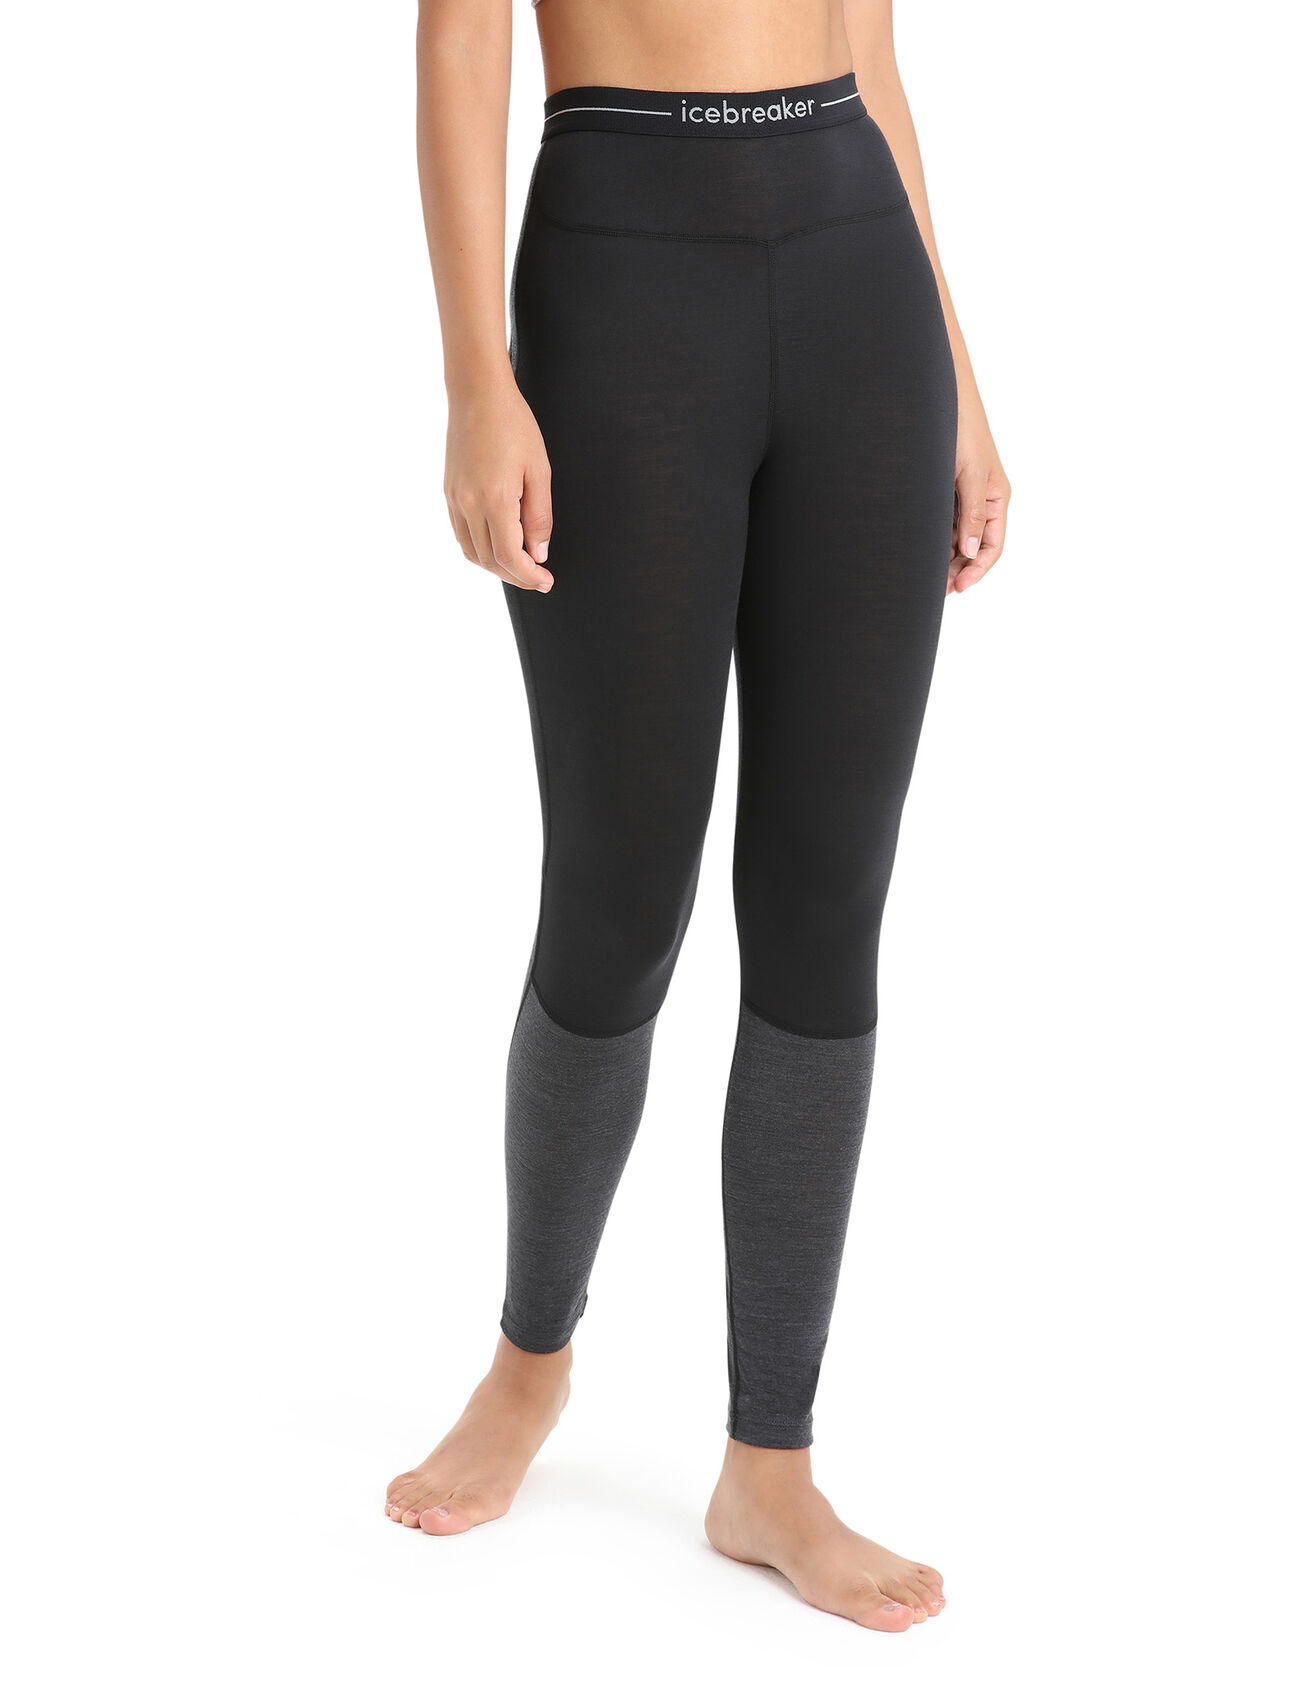 Womens 125 ZoneKnit™ Merino Blend Thermal Leggings Ultralight merino base layer bottoms designed to help regulate body temperature during high-intensity activity, the 125 ZoneKnit™ Leggings feature our jersey Cool-Lite™ fabric for adventure and everyday training.